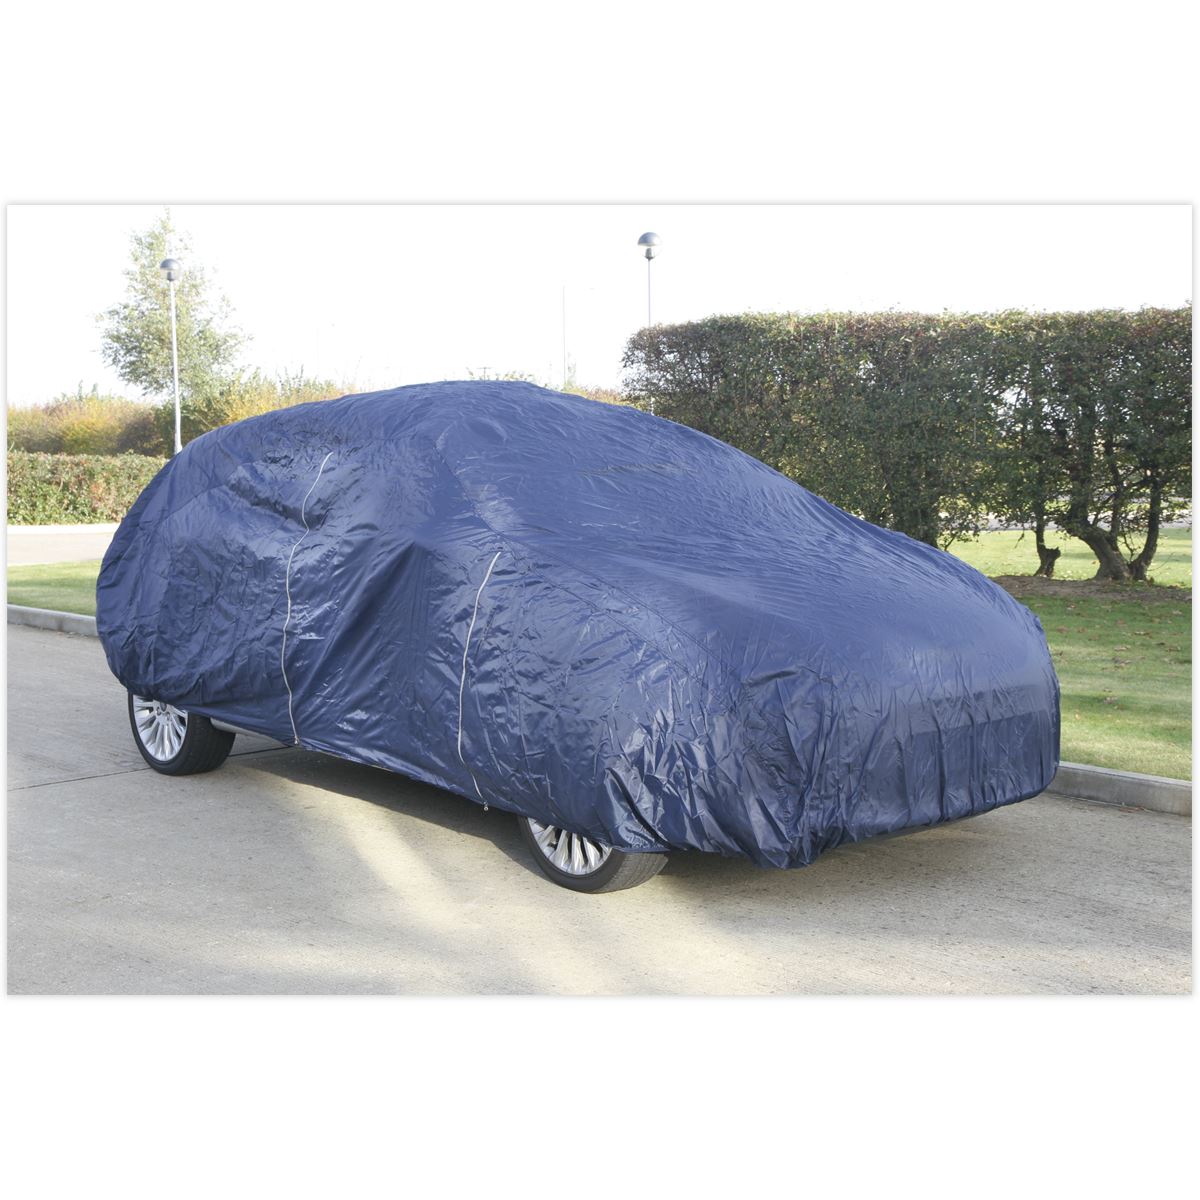 Sealey Car Cover Lightweight Large 4300 x 1690 x 1220mm